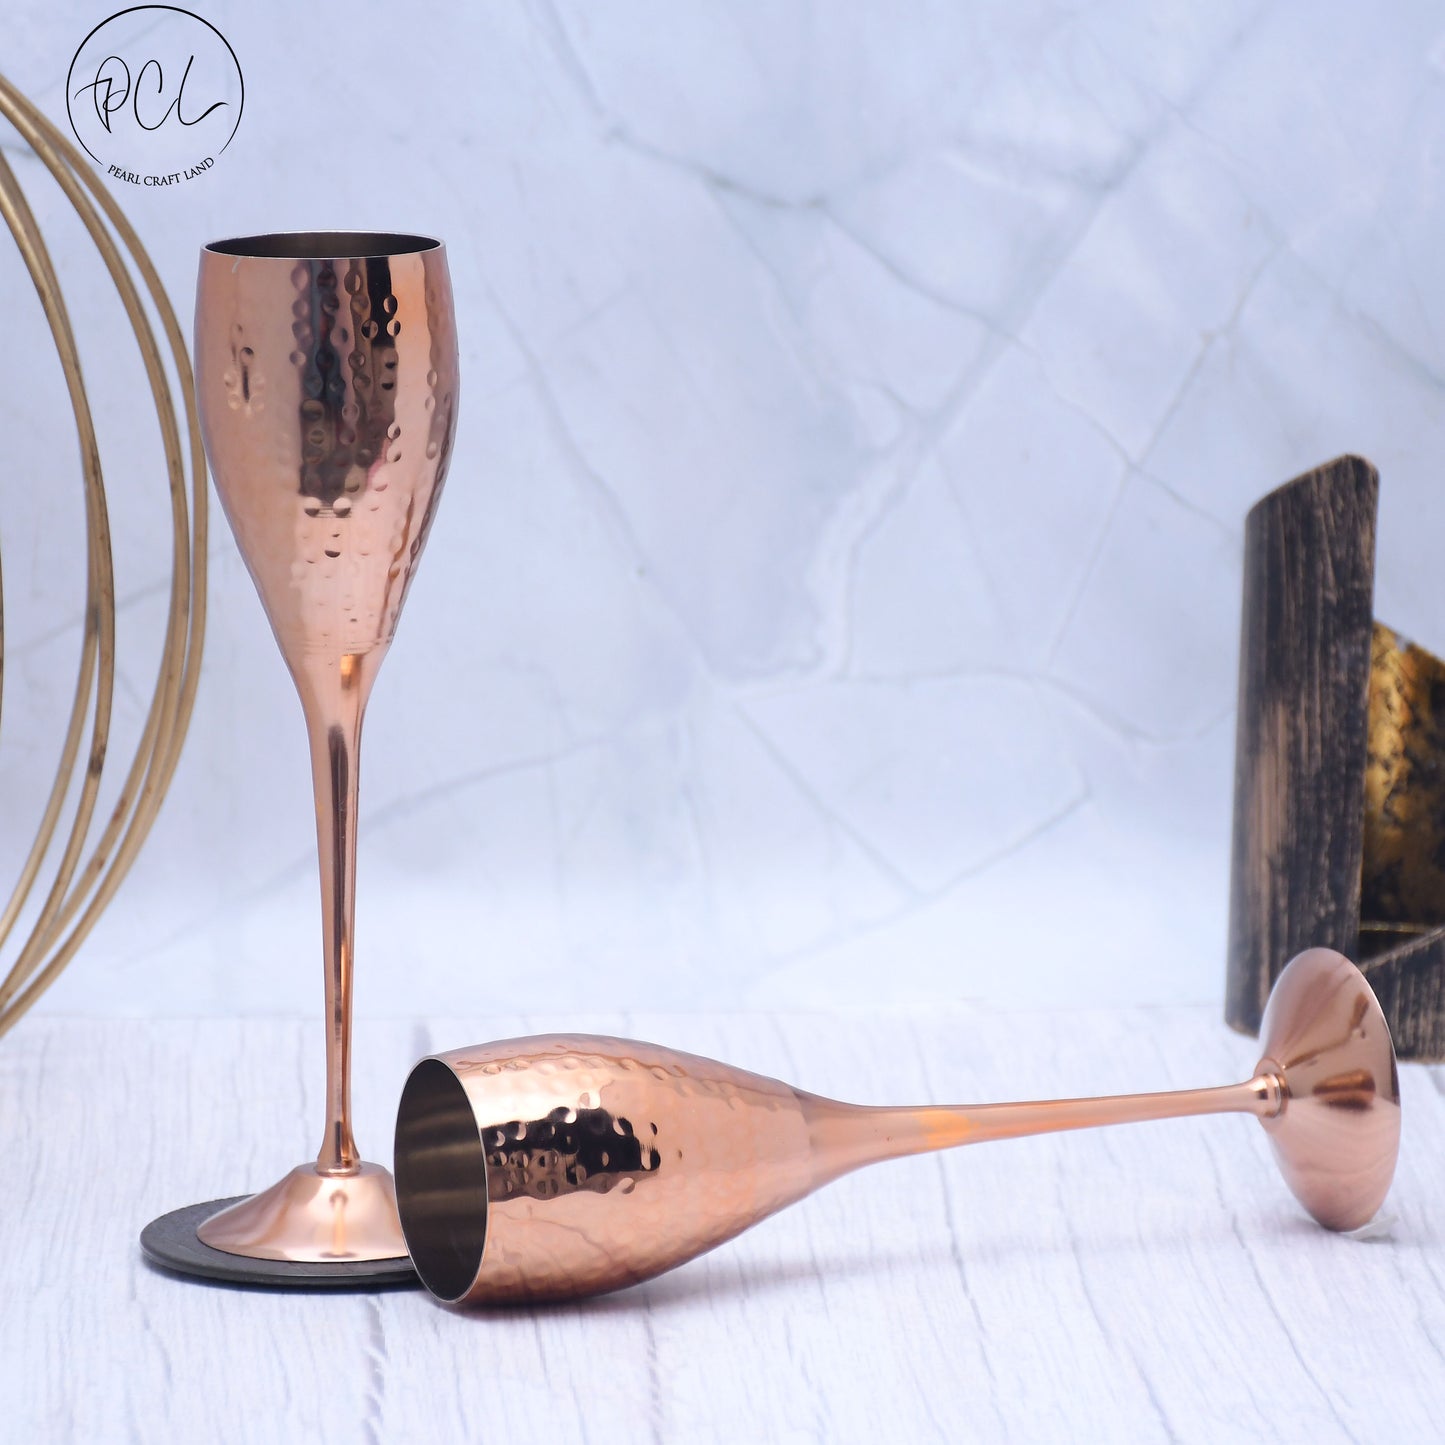 Beautifully Designed Round Copper Finished Goblet Glasses | Set of 2